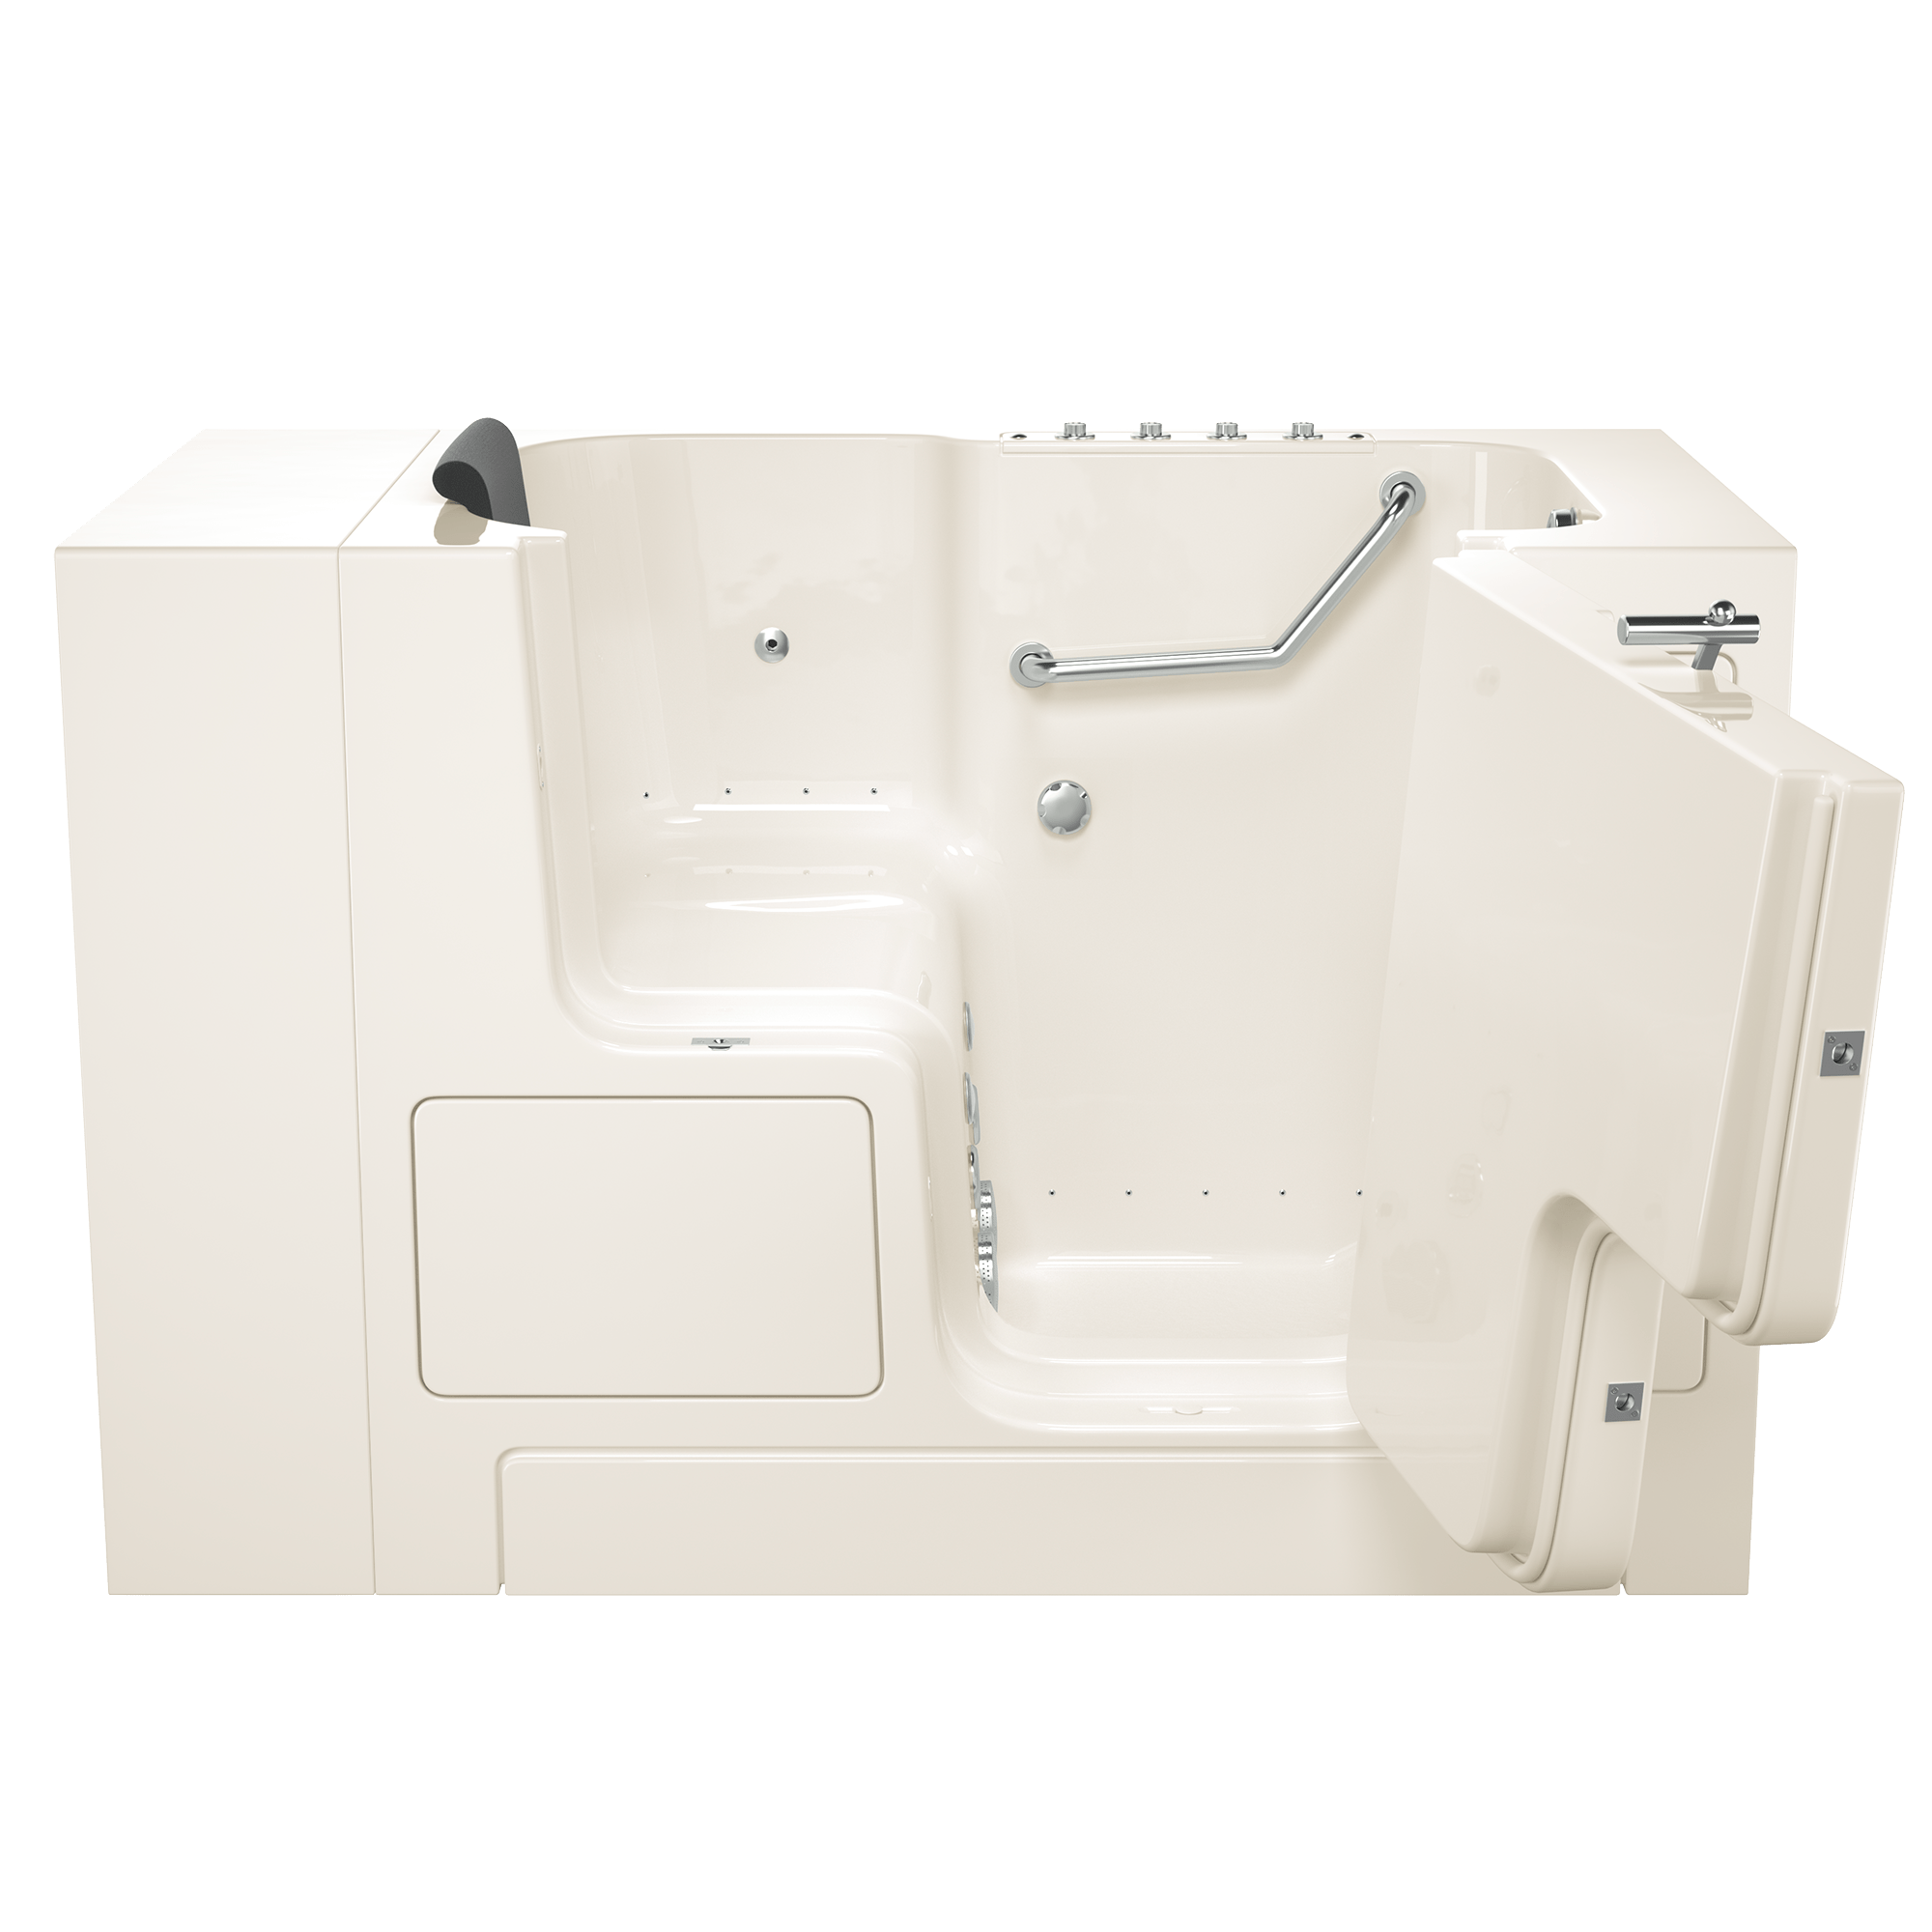 Gelcoat Premium Series 32 x 52 -Inch Walk-in Tub With Combination Air Spa and Whirlpool Systems - Right-Hand Drain